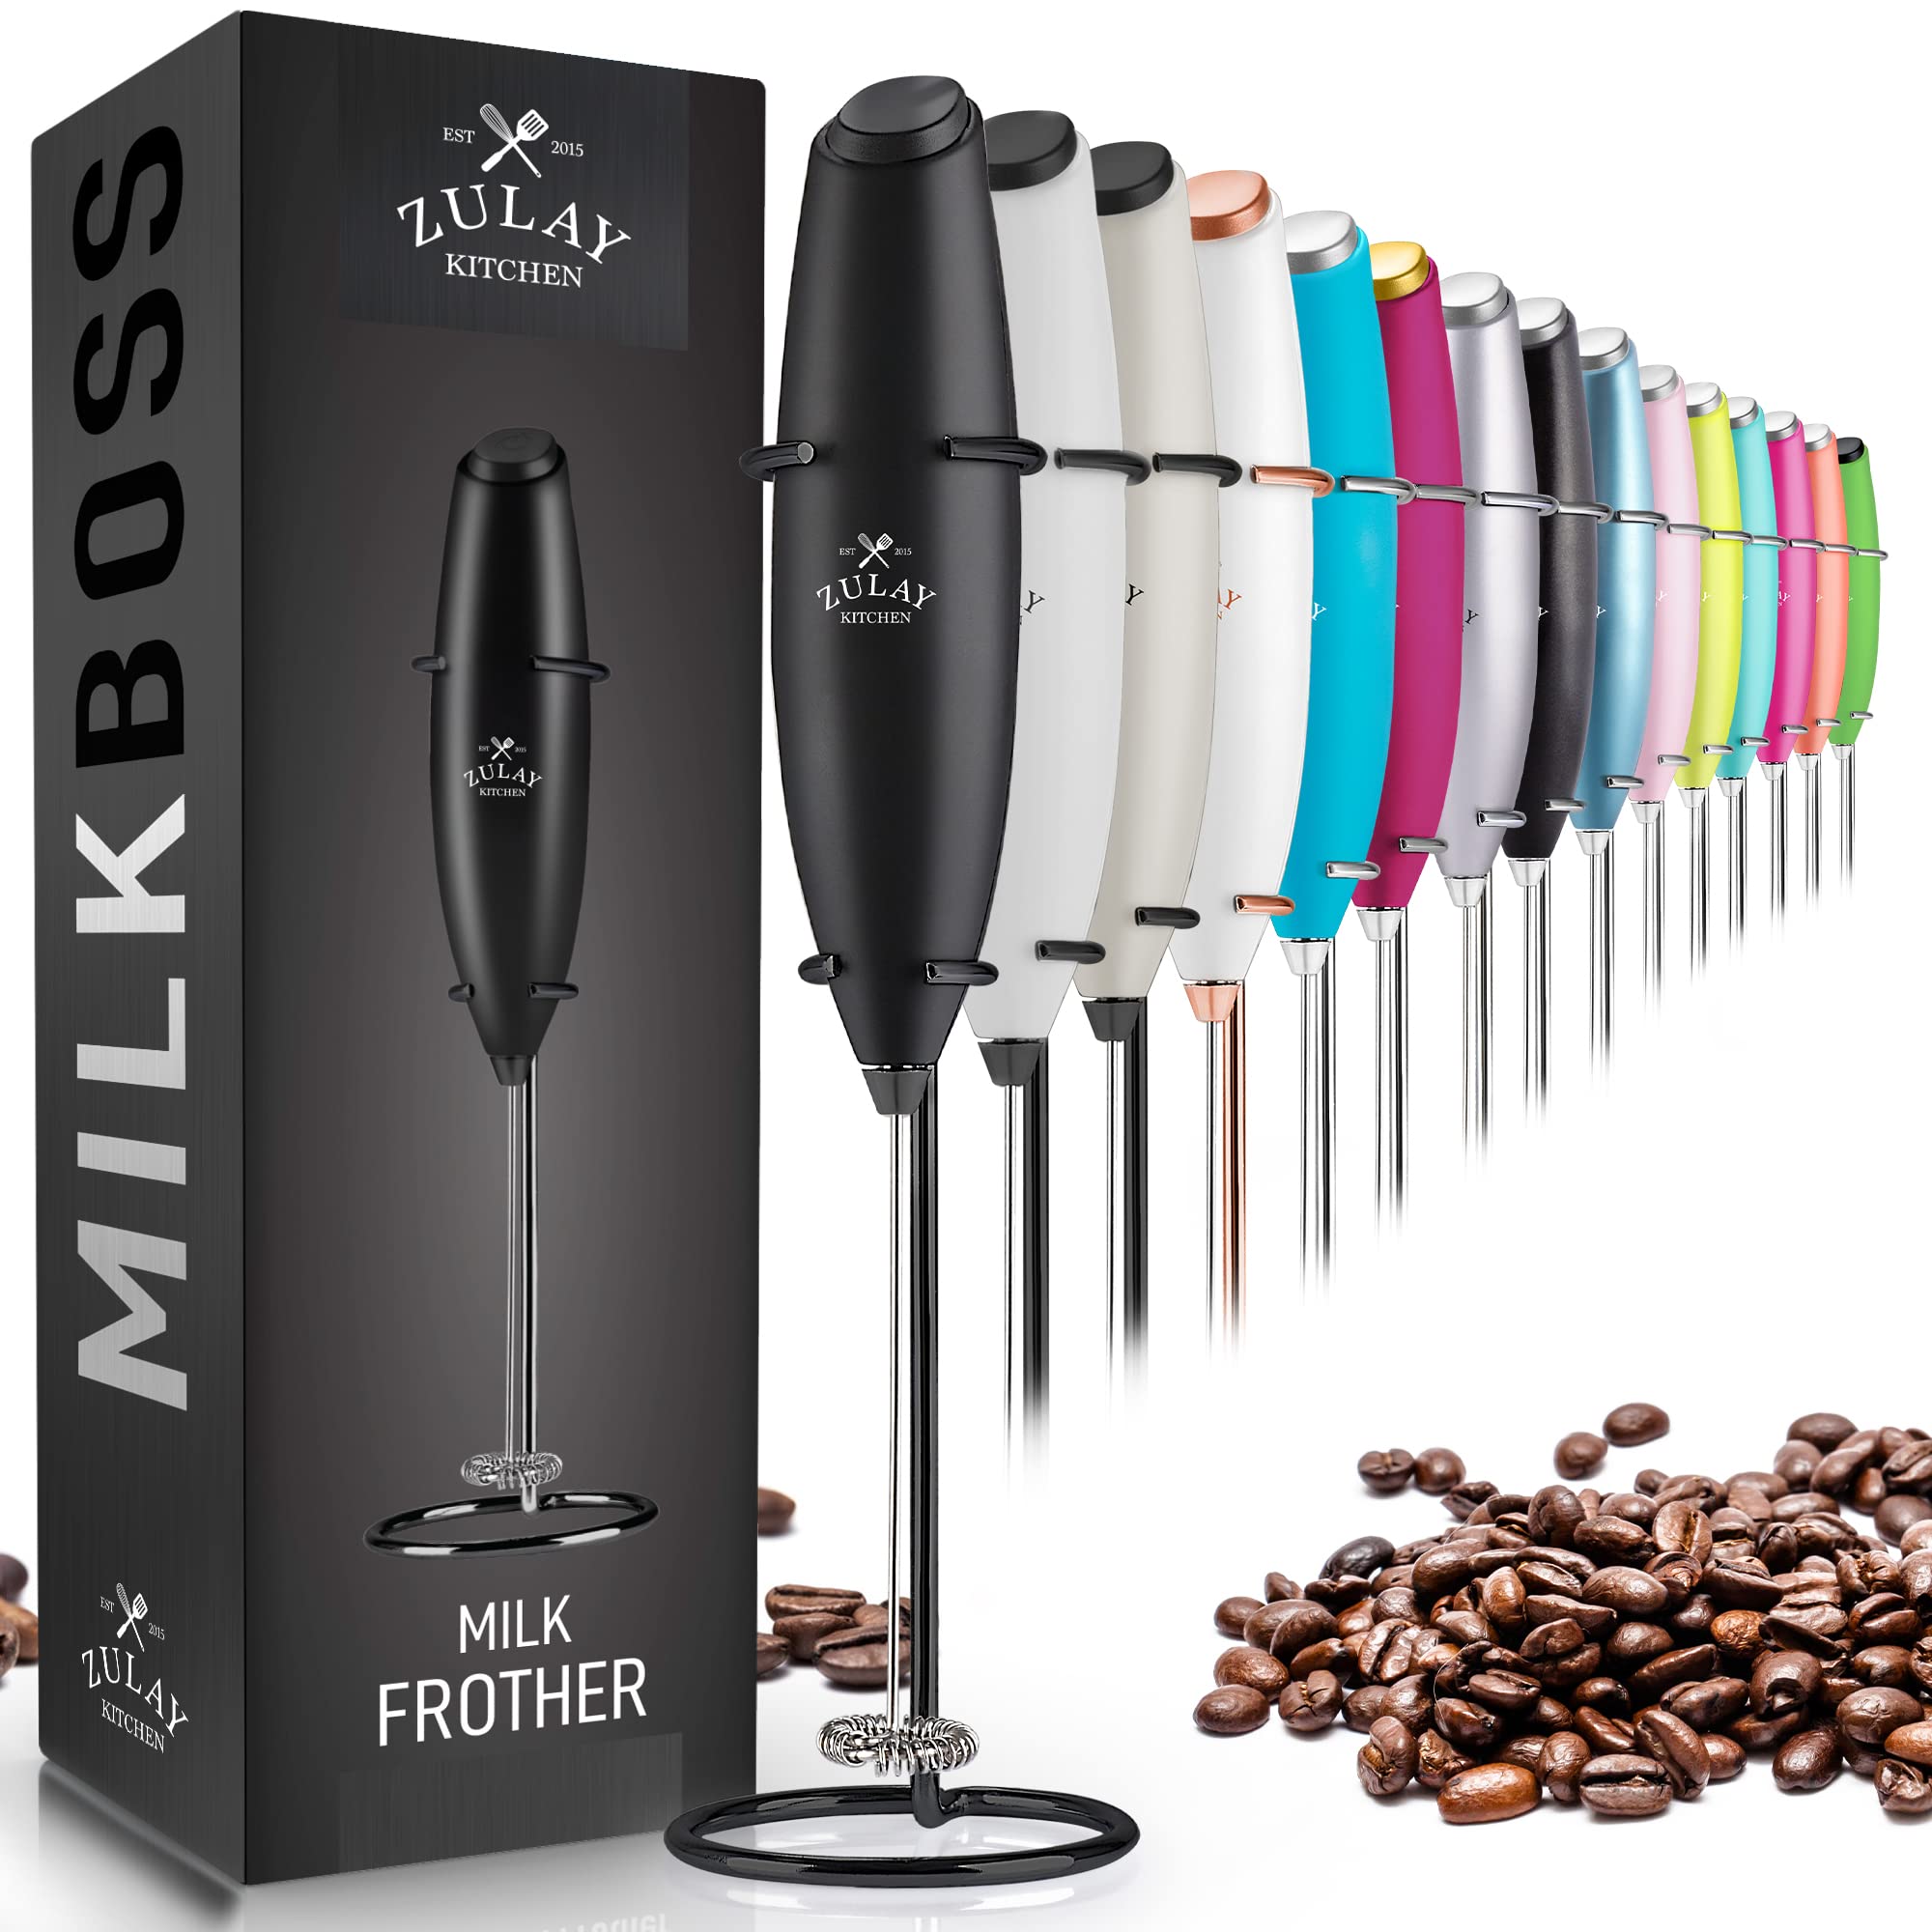 Zulay Executive Series Ultra Premium Gift Milk Frother - Black, 1